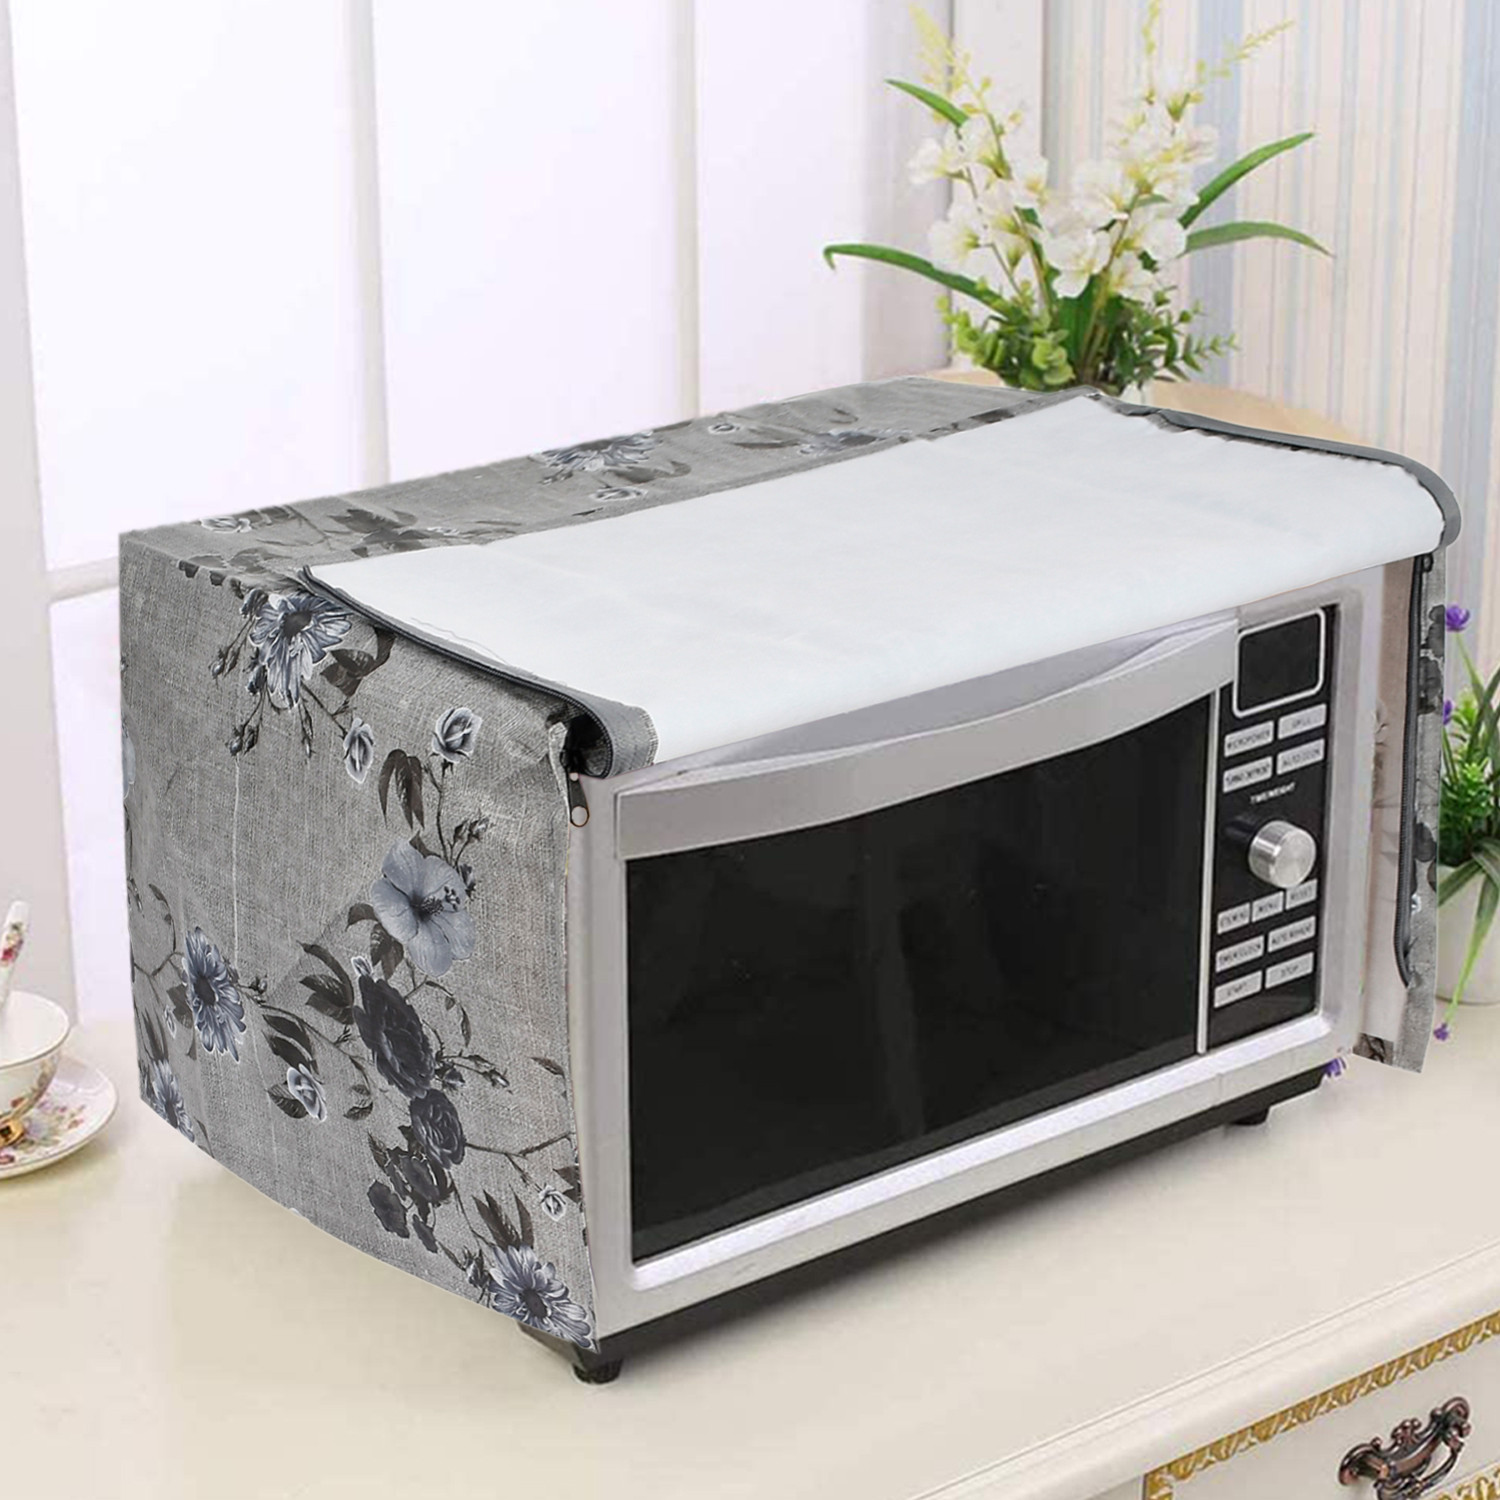 Kuber Industries PVC Flower Printed Microwave Oven Cover, Dustproof Machine Protector Cover,30 Ltr. (Grey)